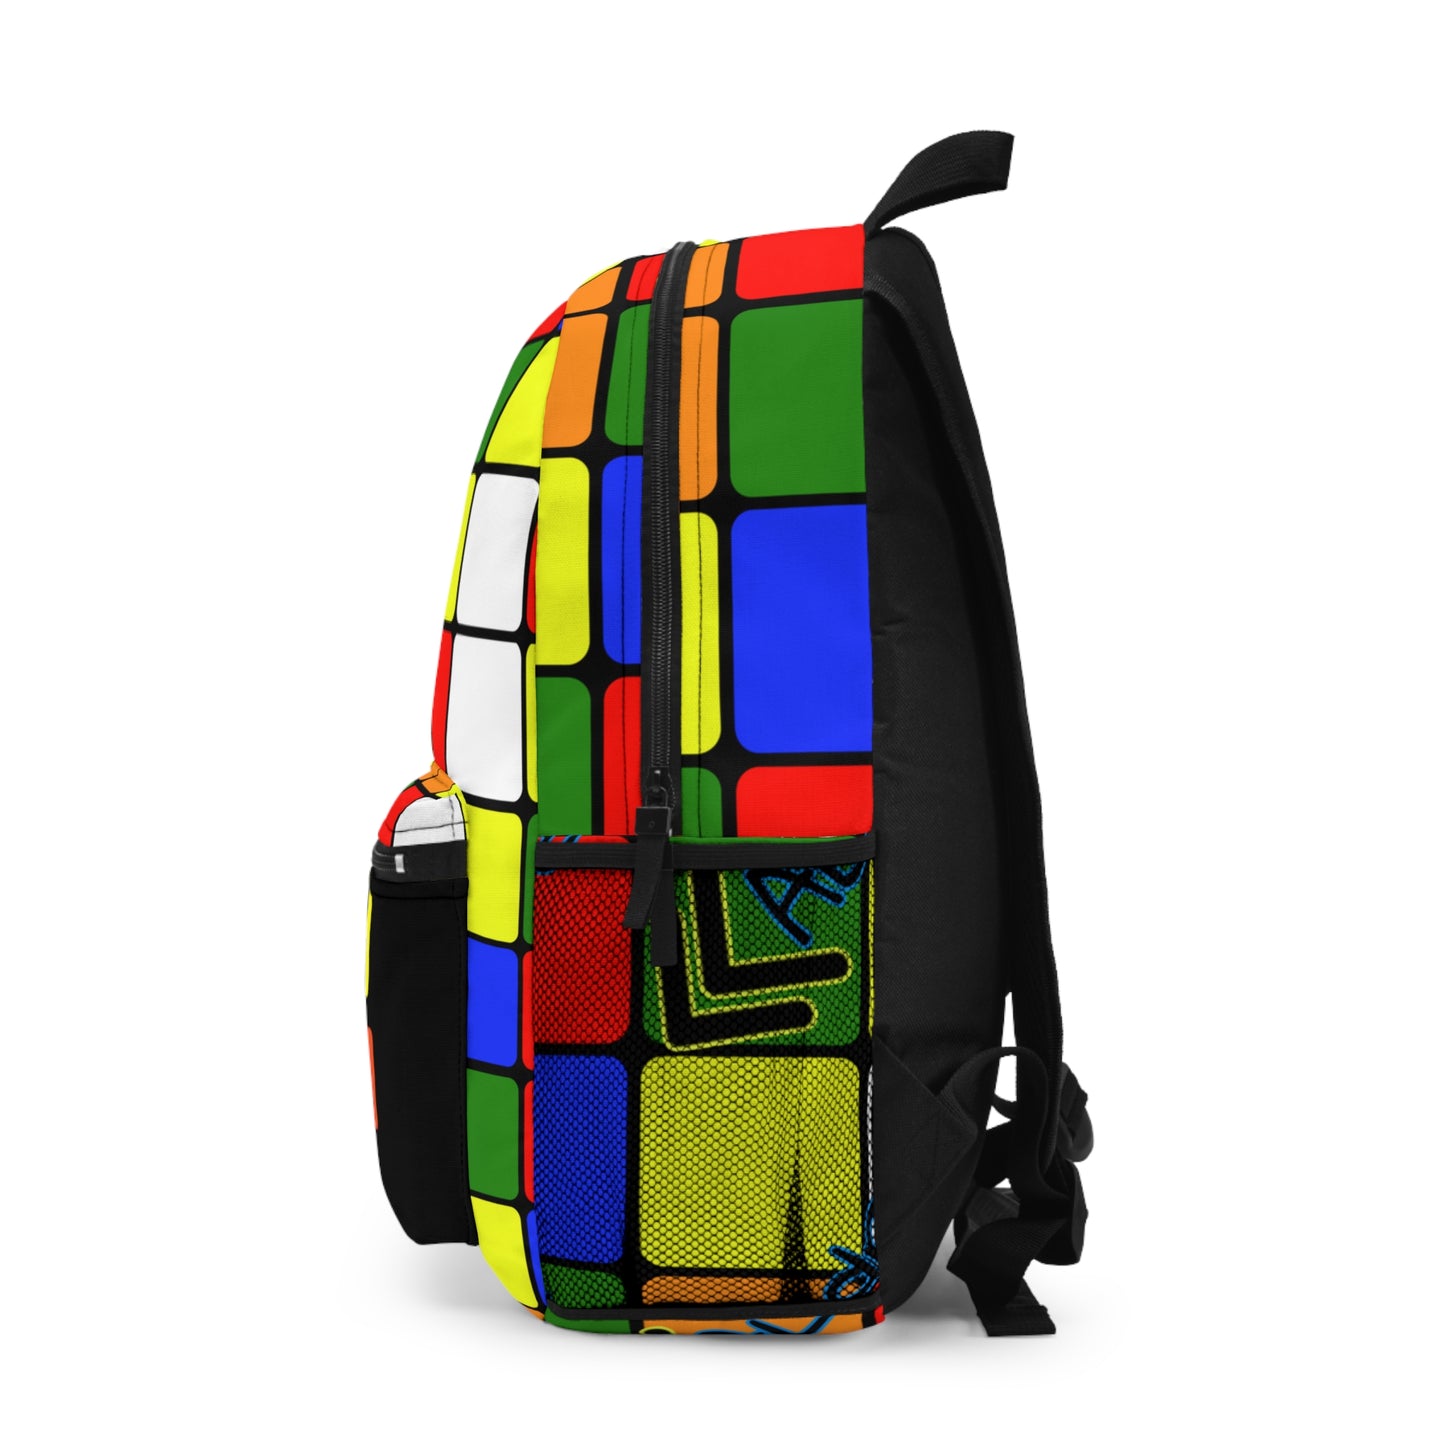 ALdre D Cube Backpack